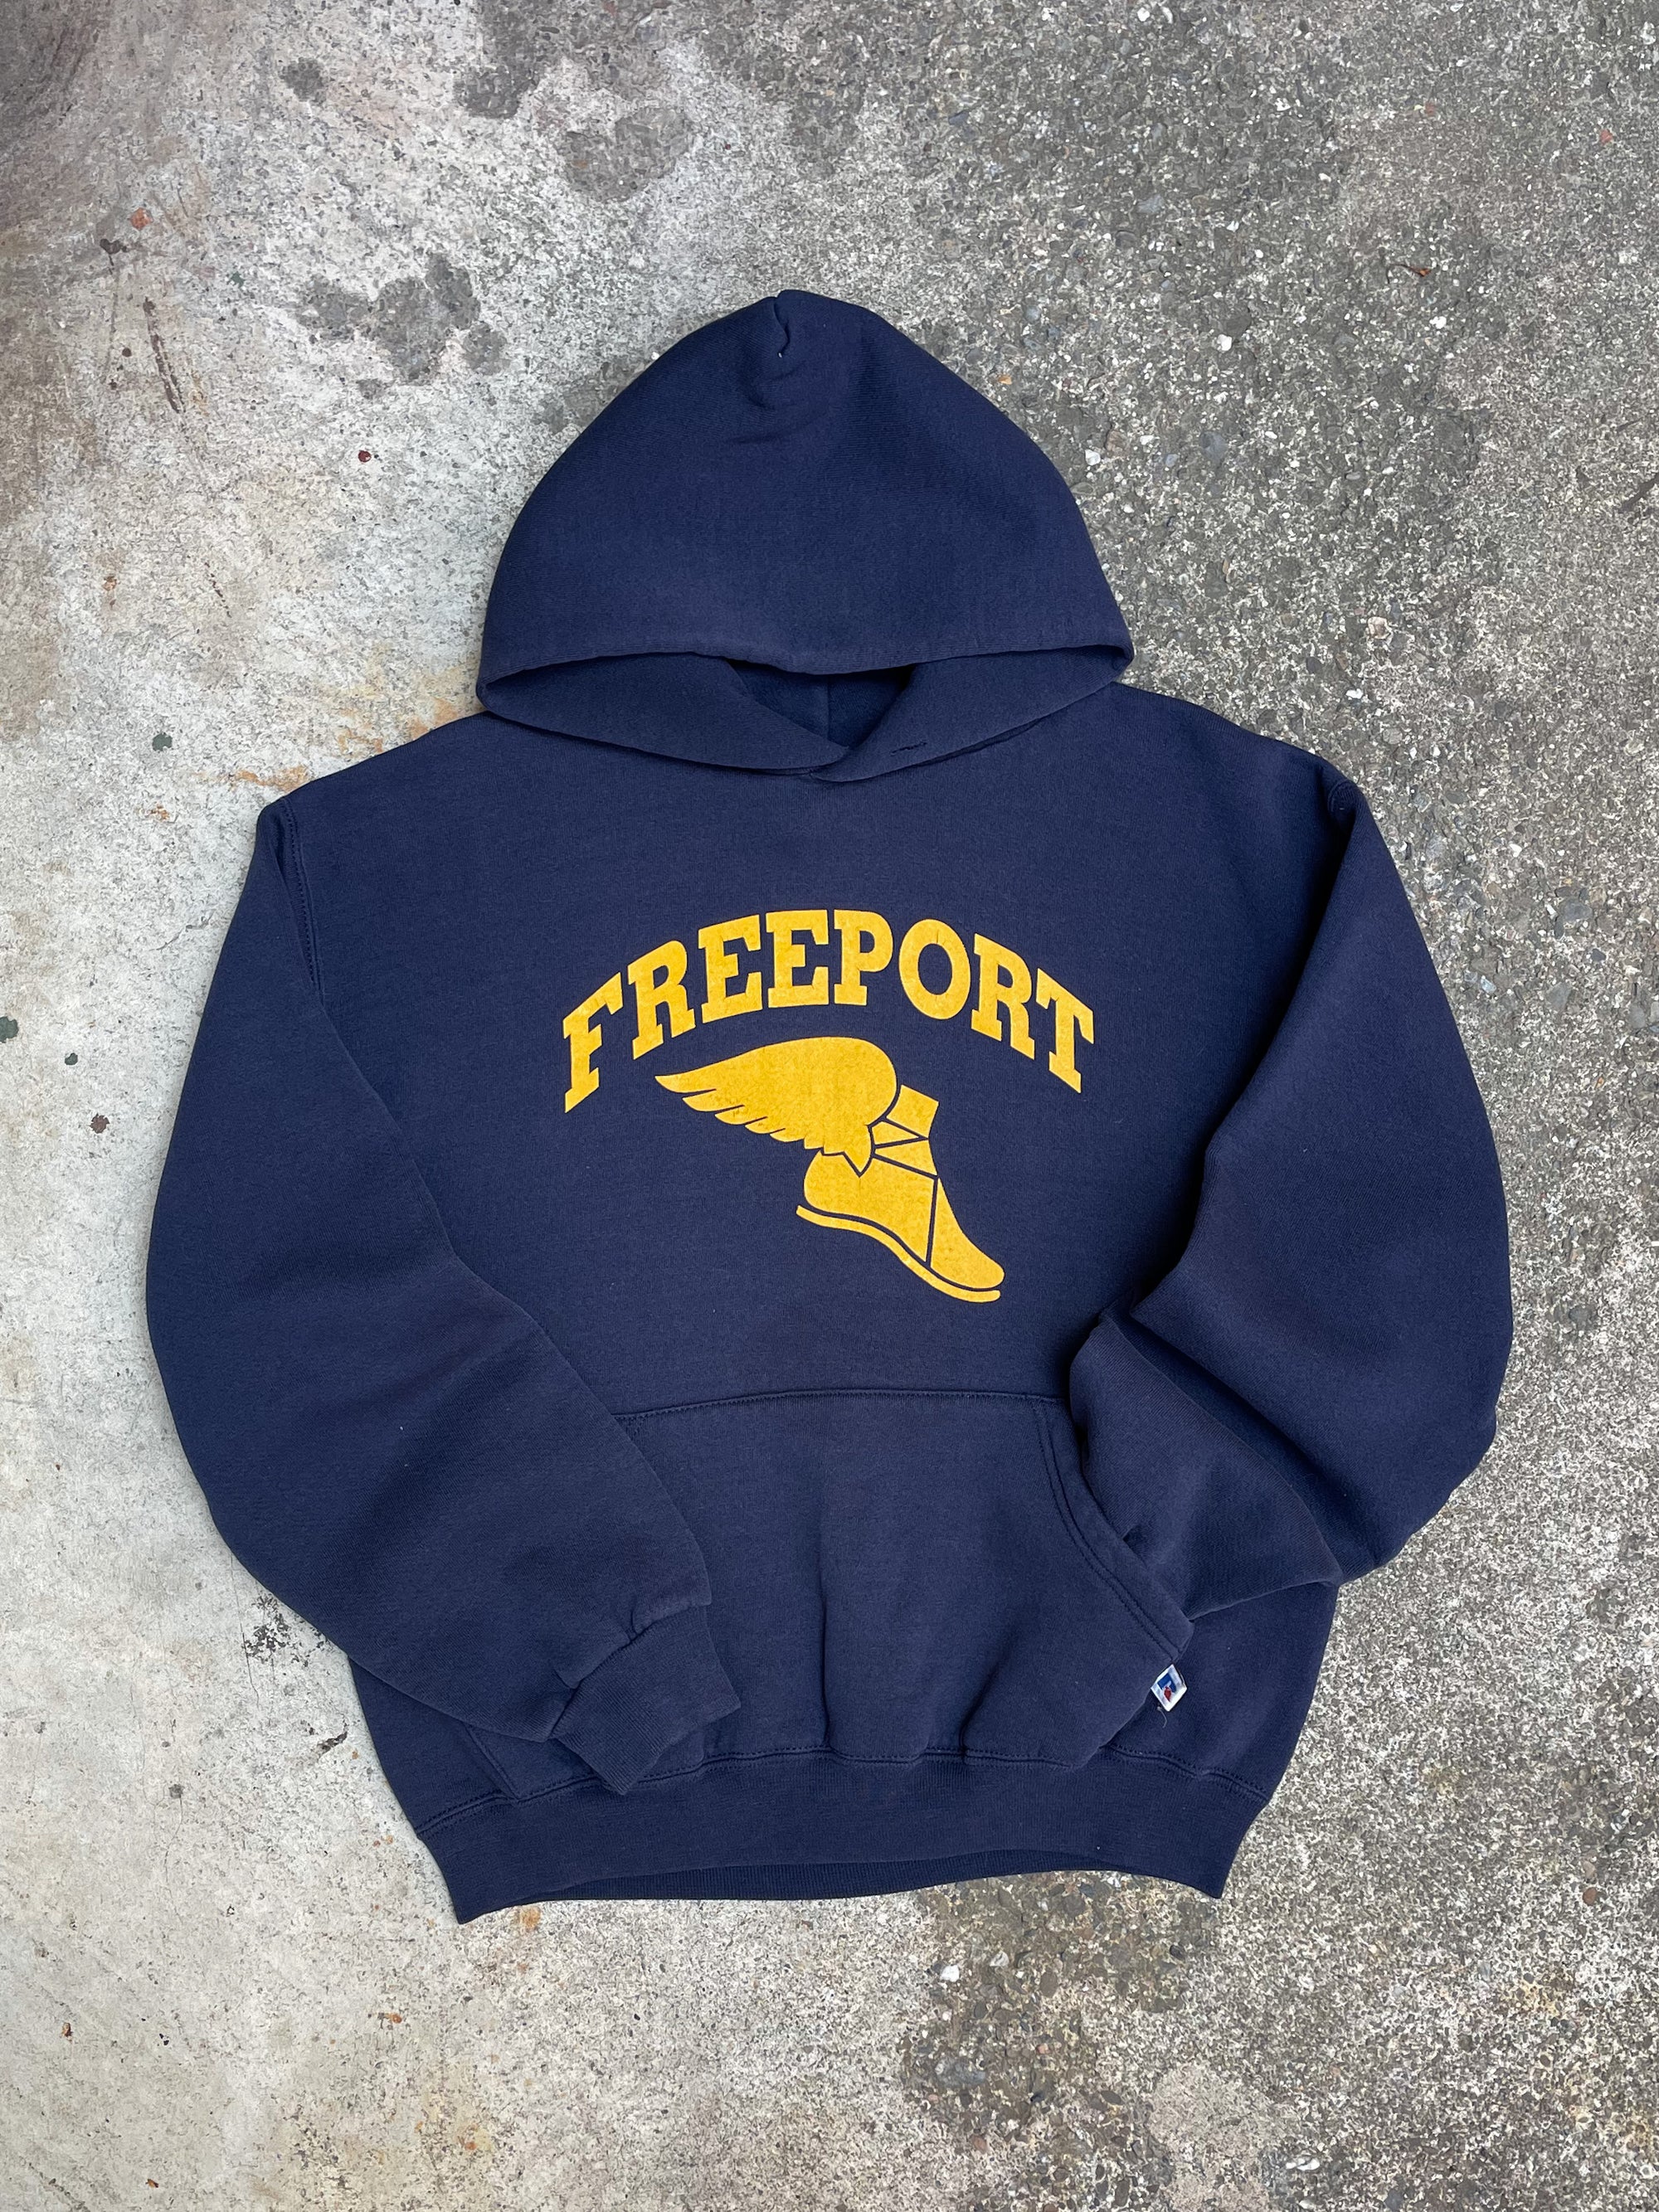 Early 00s Russell “Freeport” Hoodie (M)